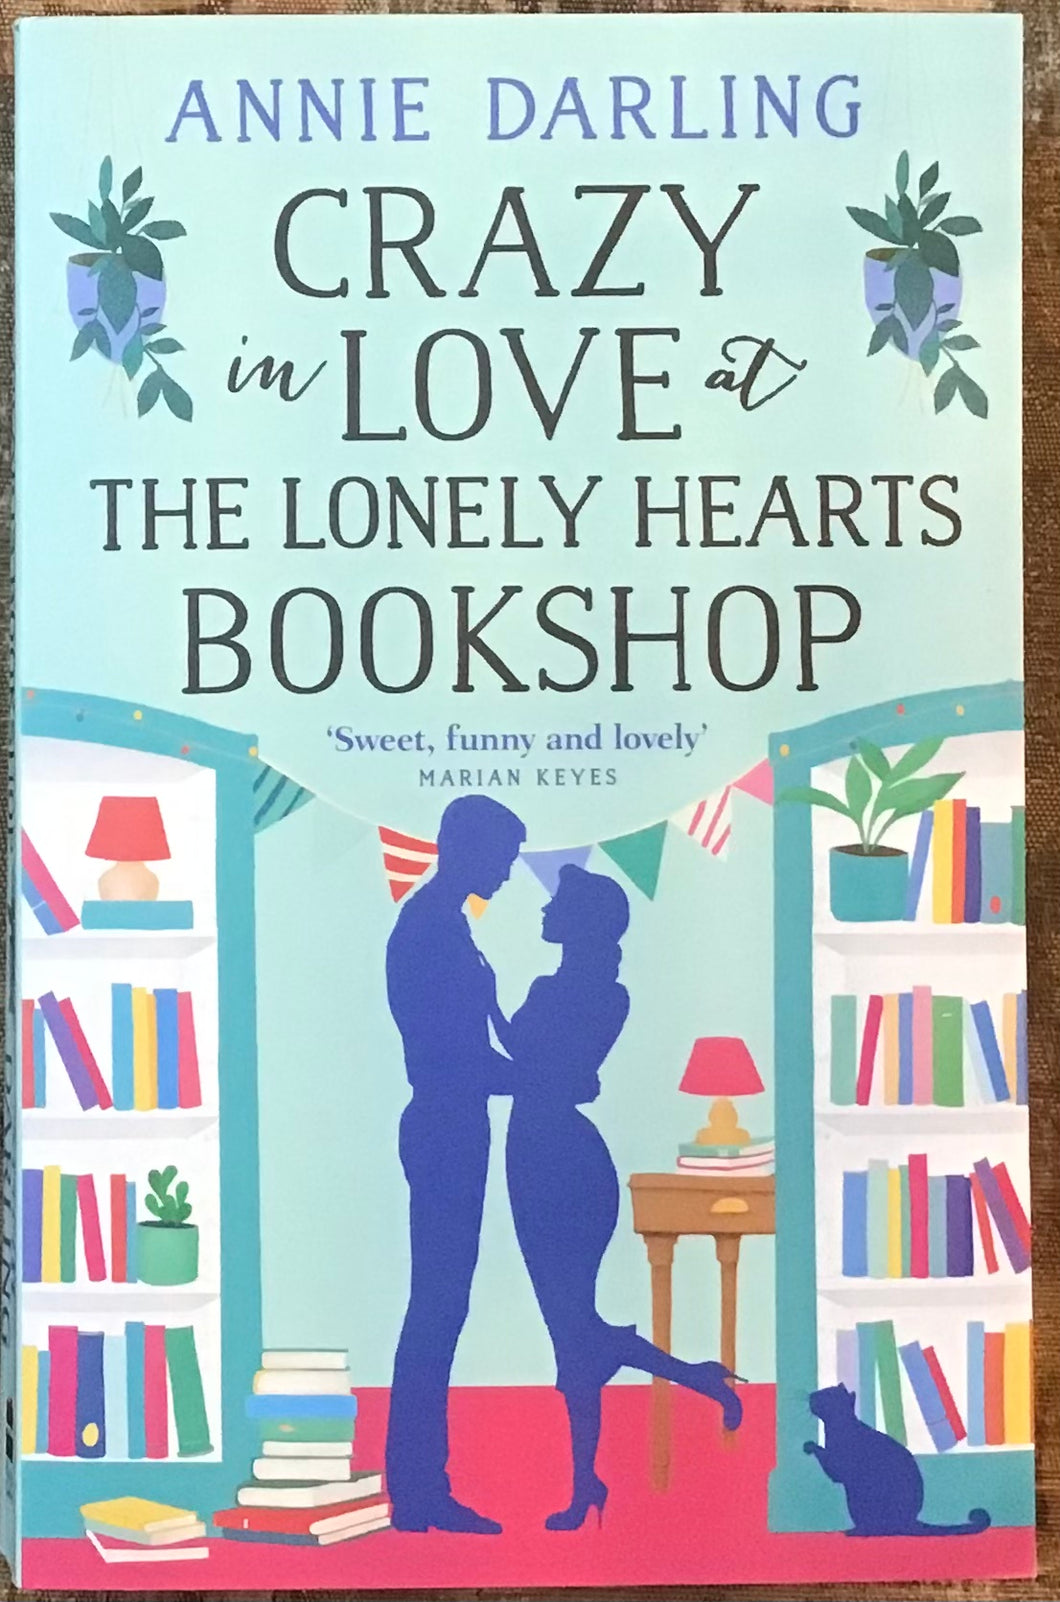 Crazy in Love at The Lonely Hearts Bookshop, Annie Darling